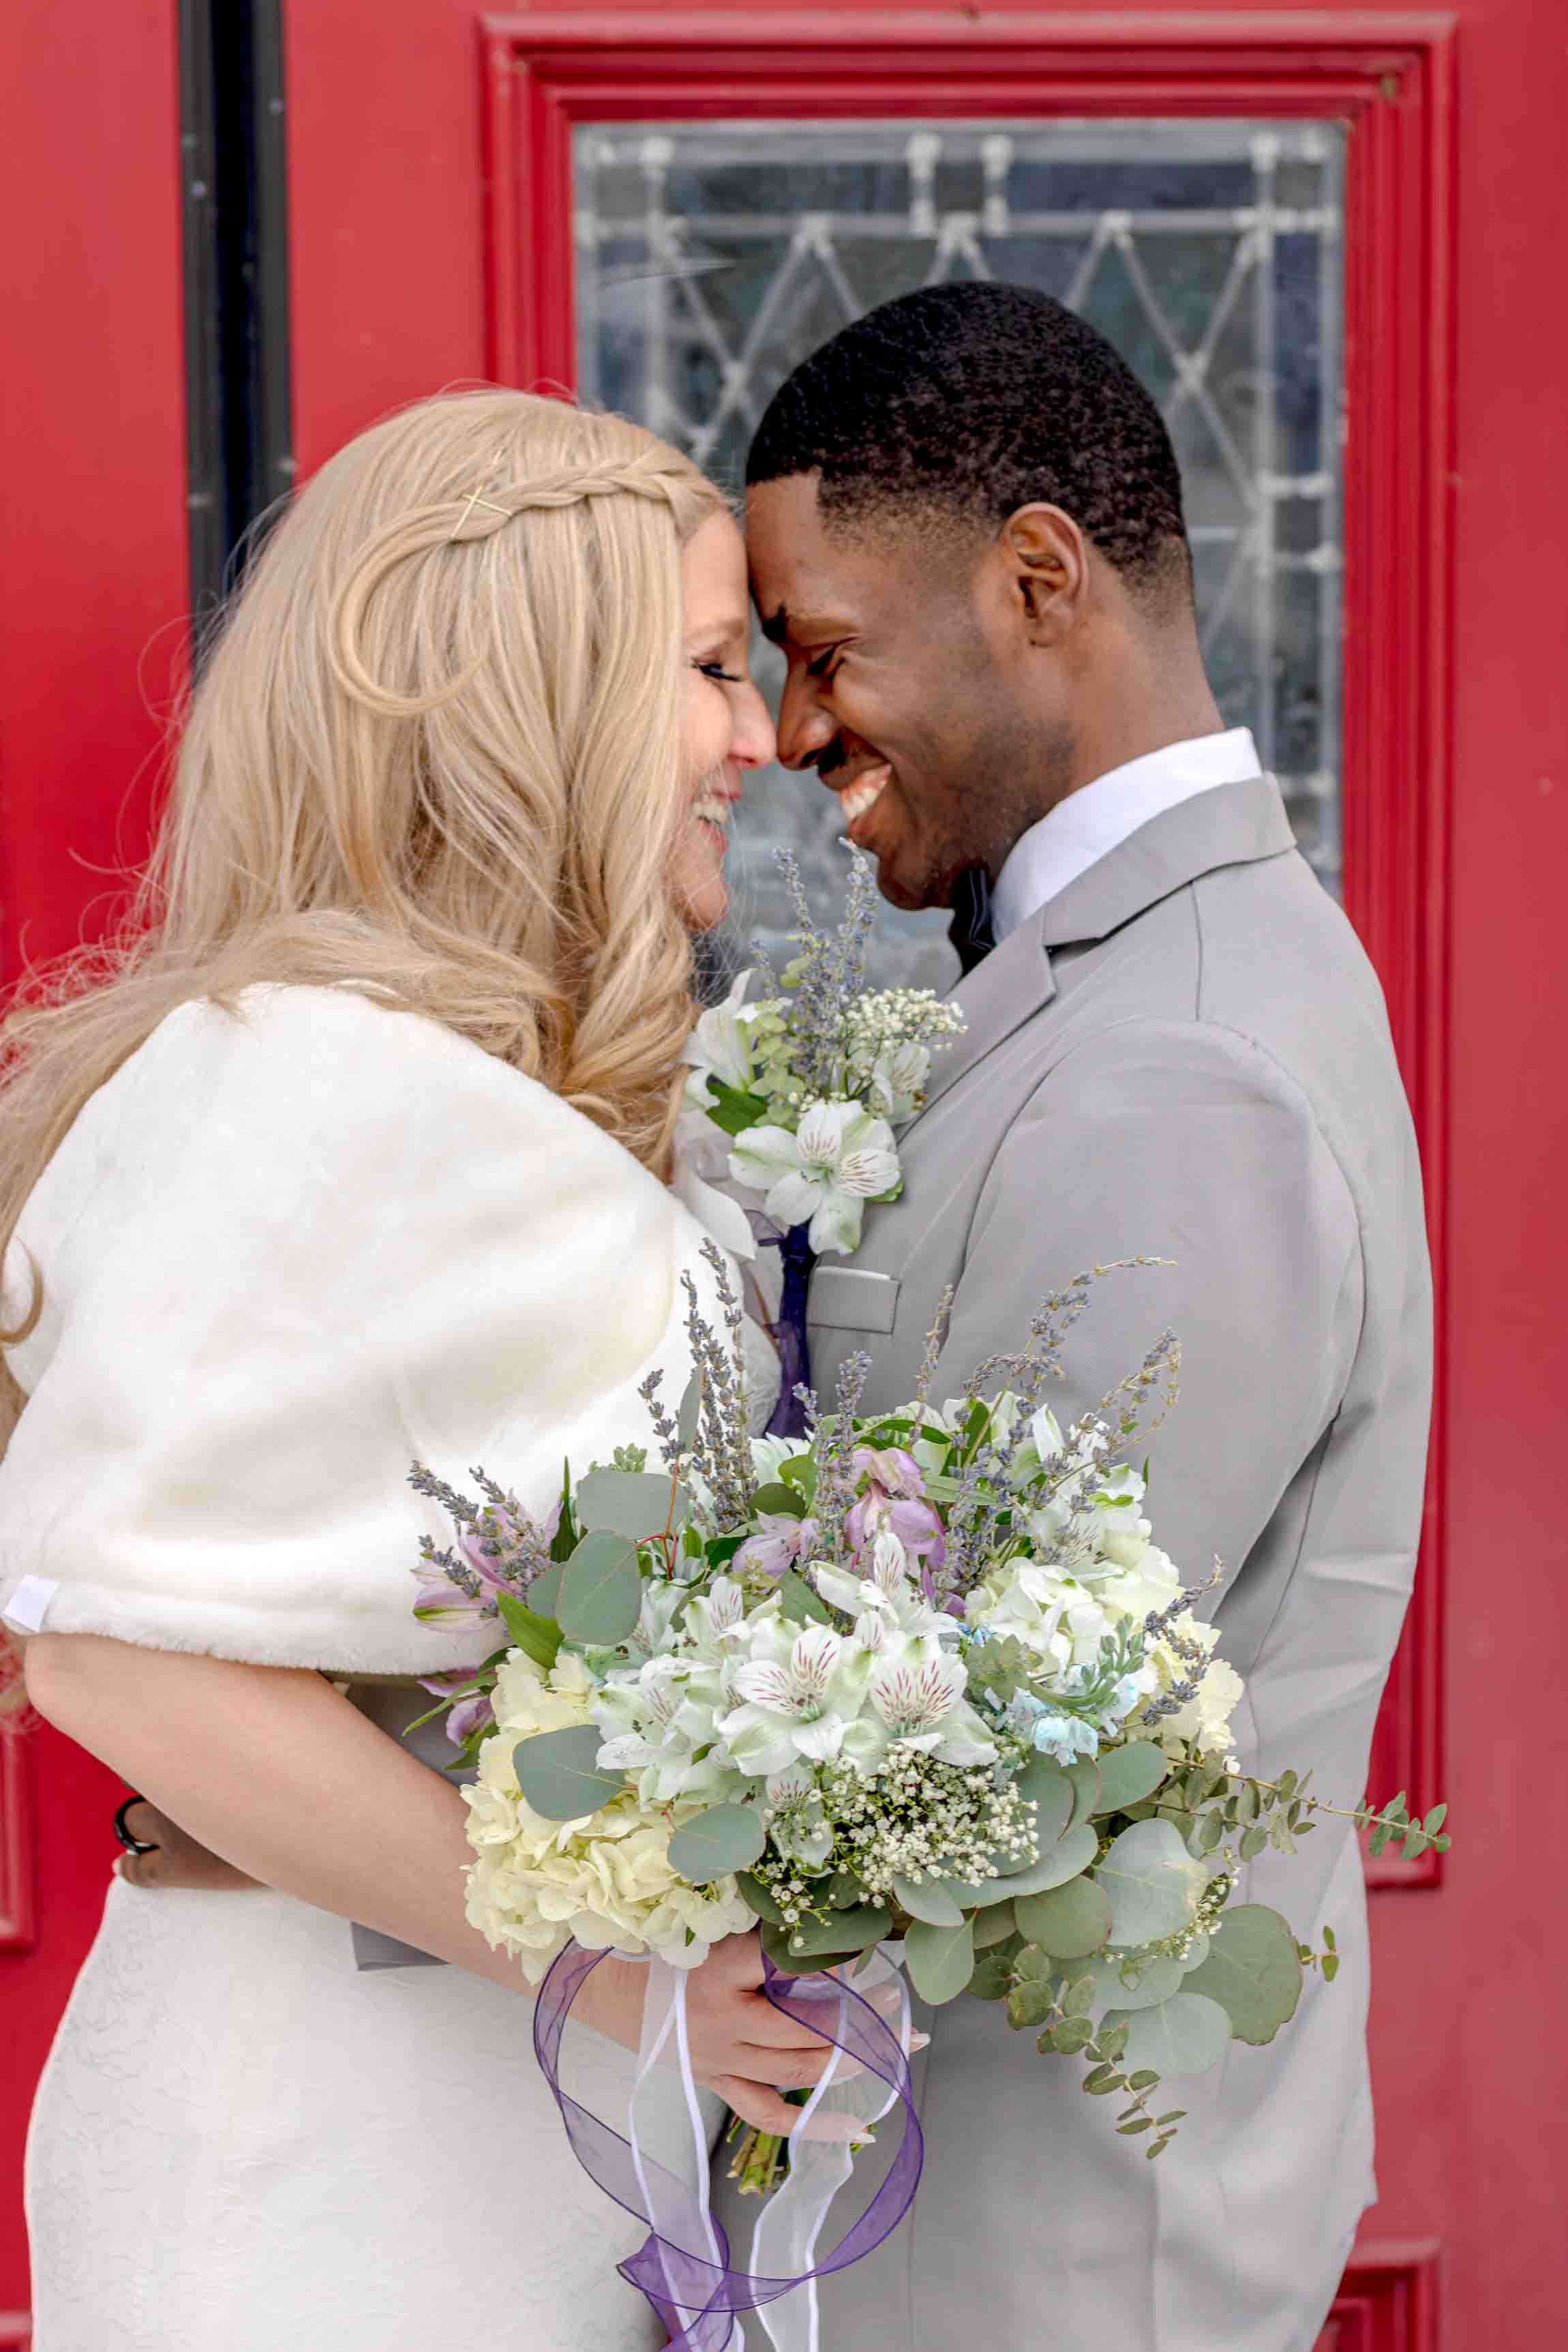 interracial couple, newlyweds, standing front of red church doors smiling at each other, bride holding bouquet Skaneateles, NY. CNY. Central New York. The Hamptons Long Island Brides. New England luxury Weddings. Northern New York Brides.